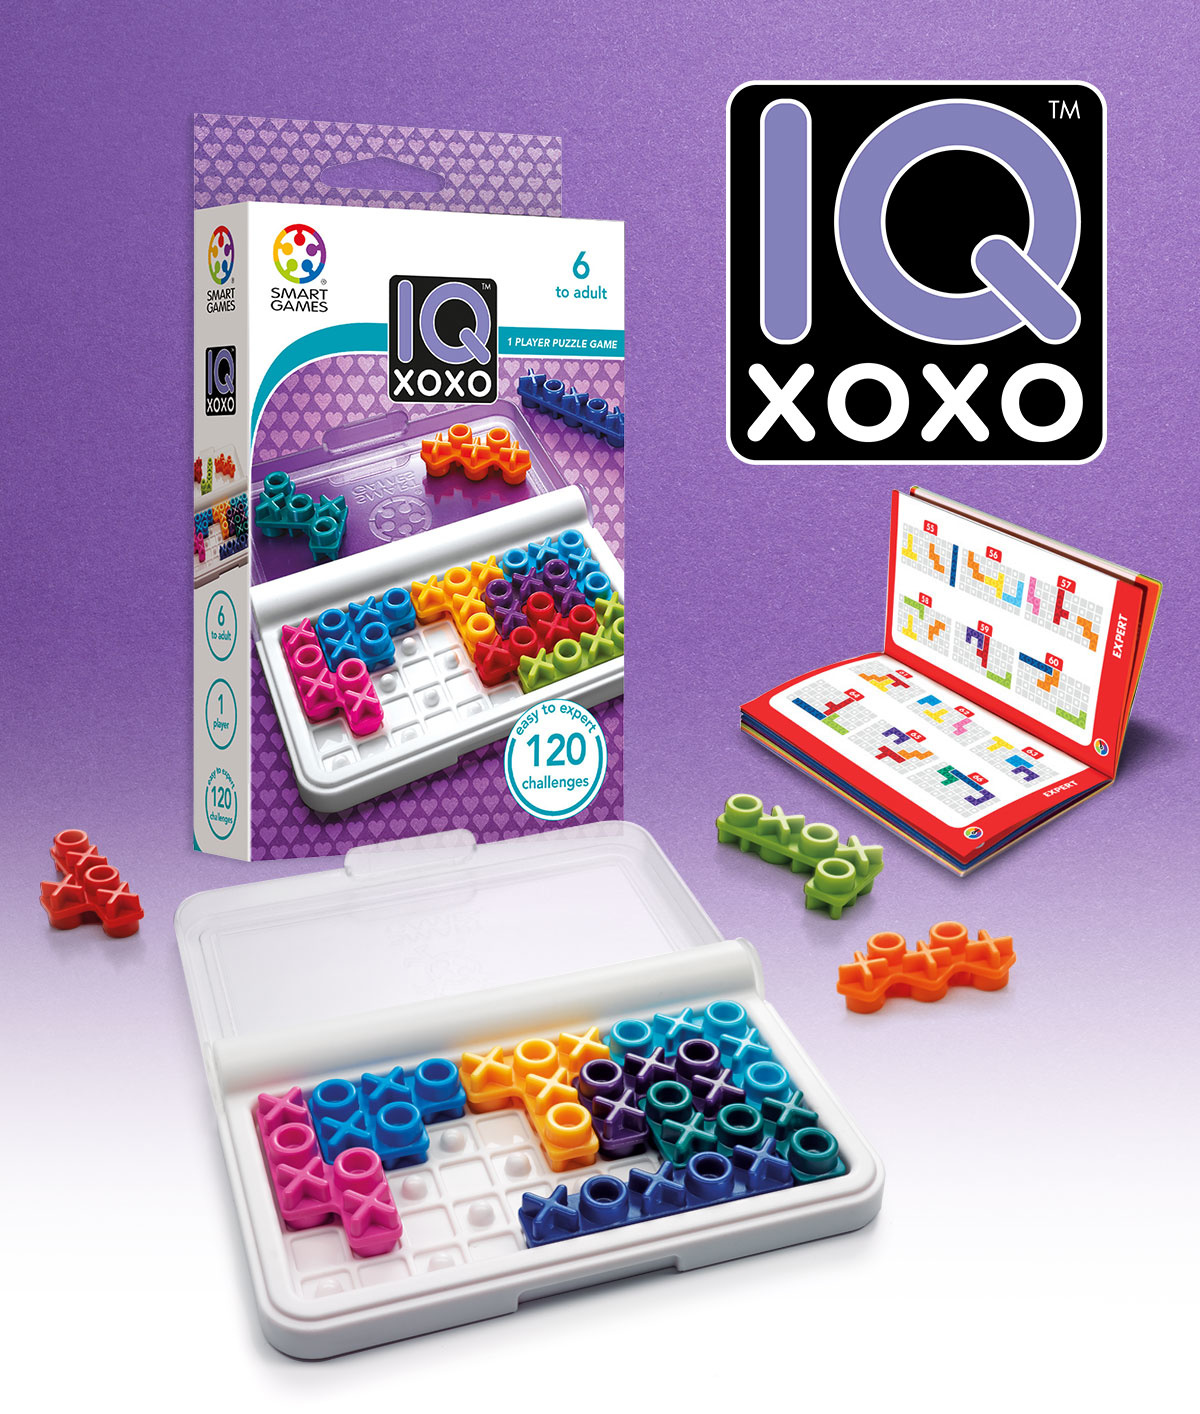 IQ XoXo - Tiddlywinks Toys And Games